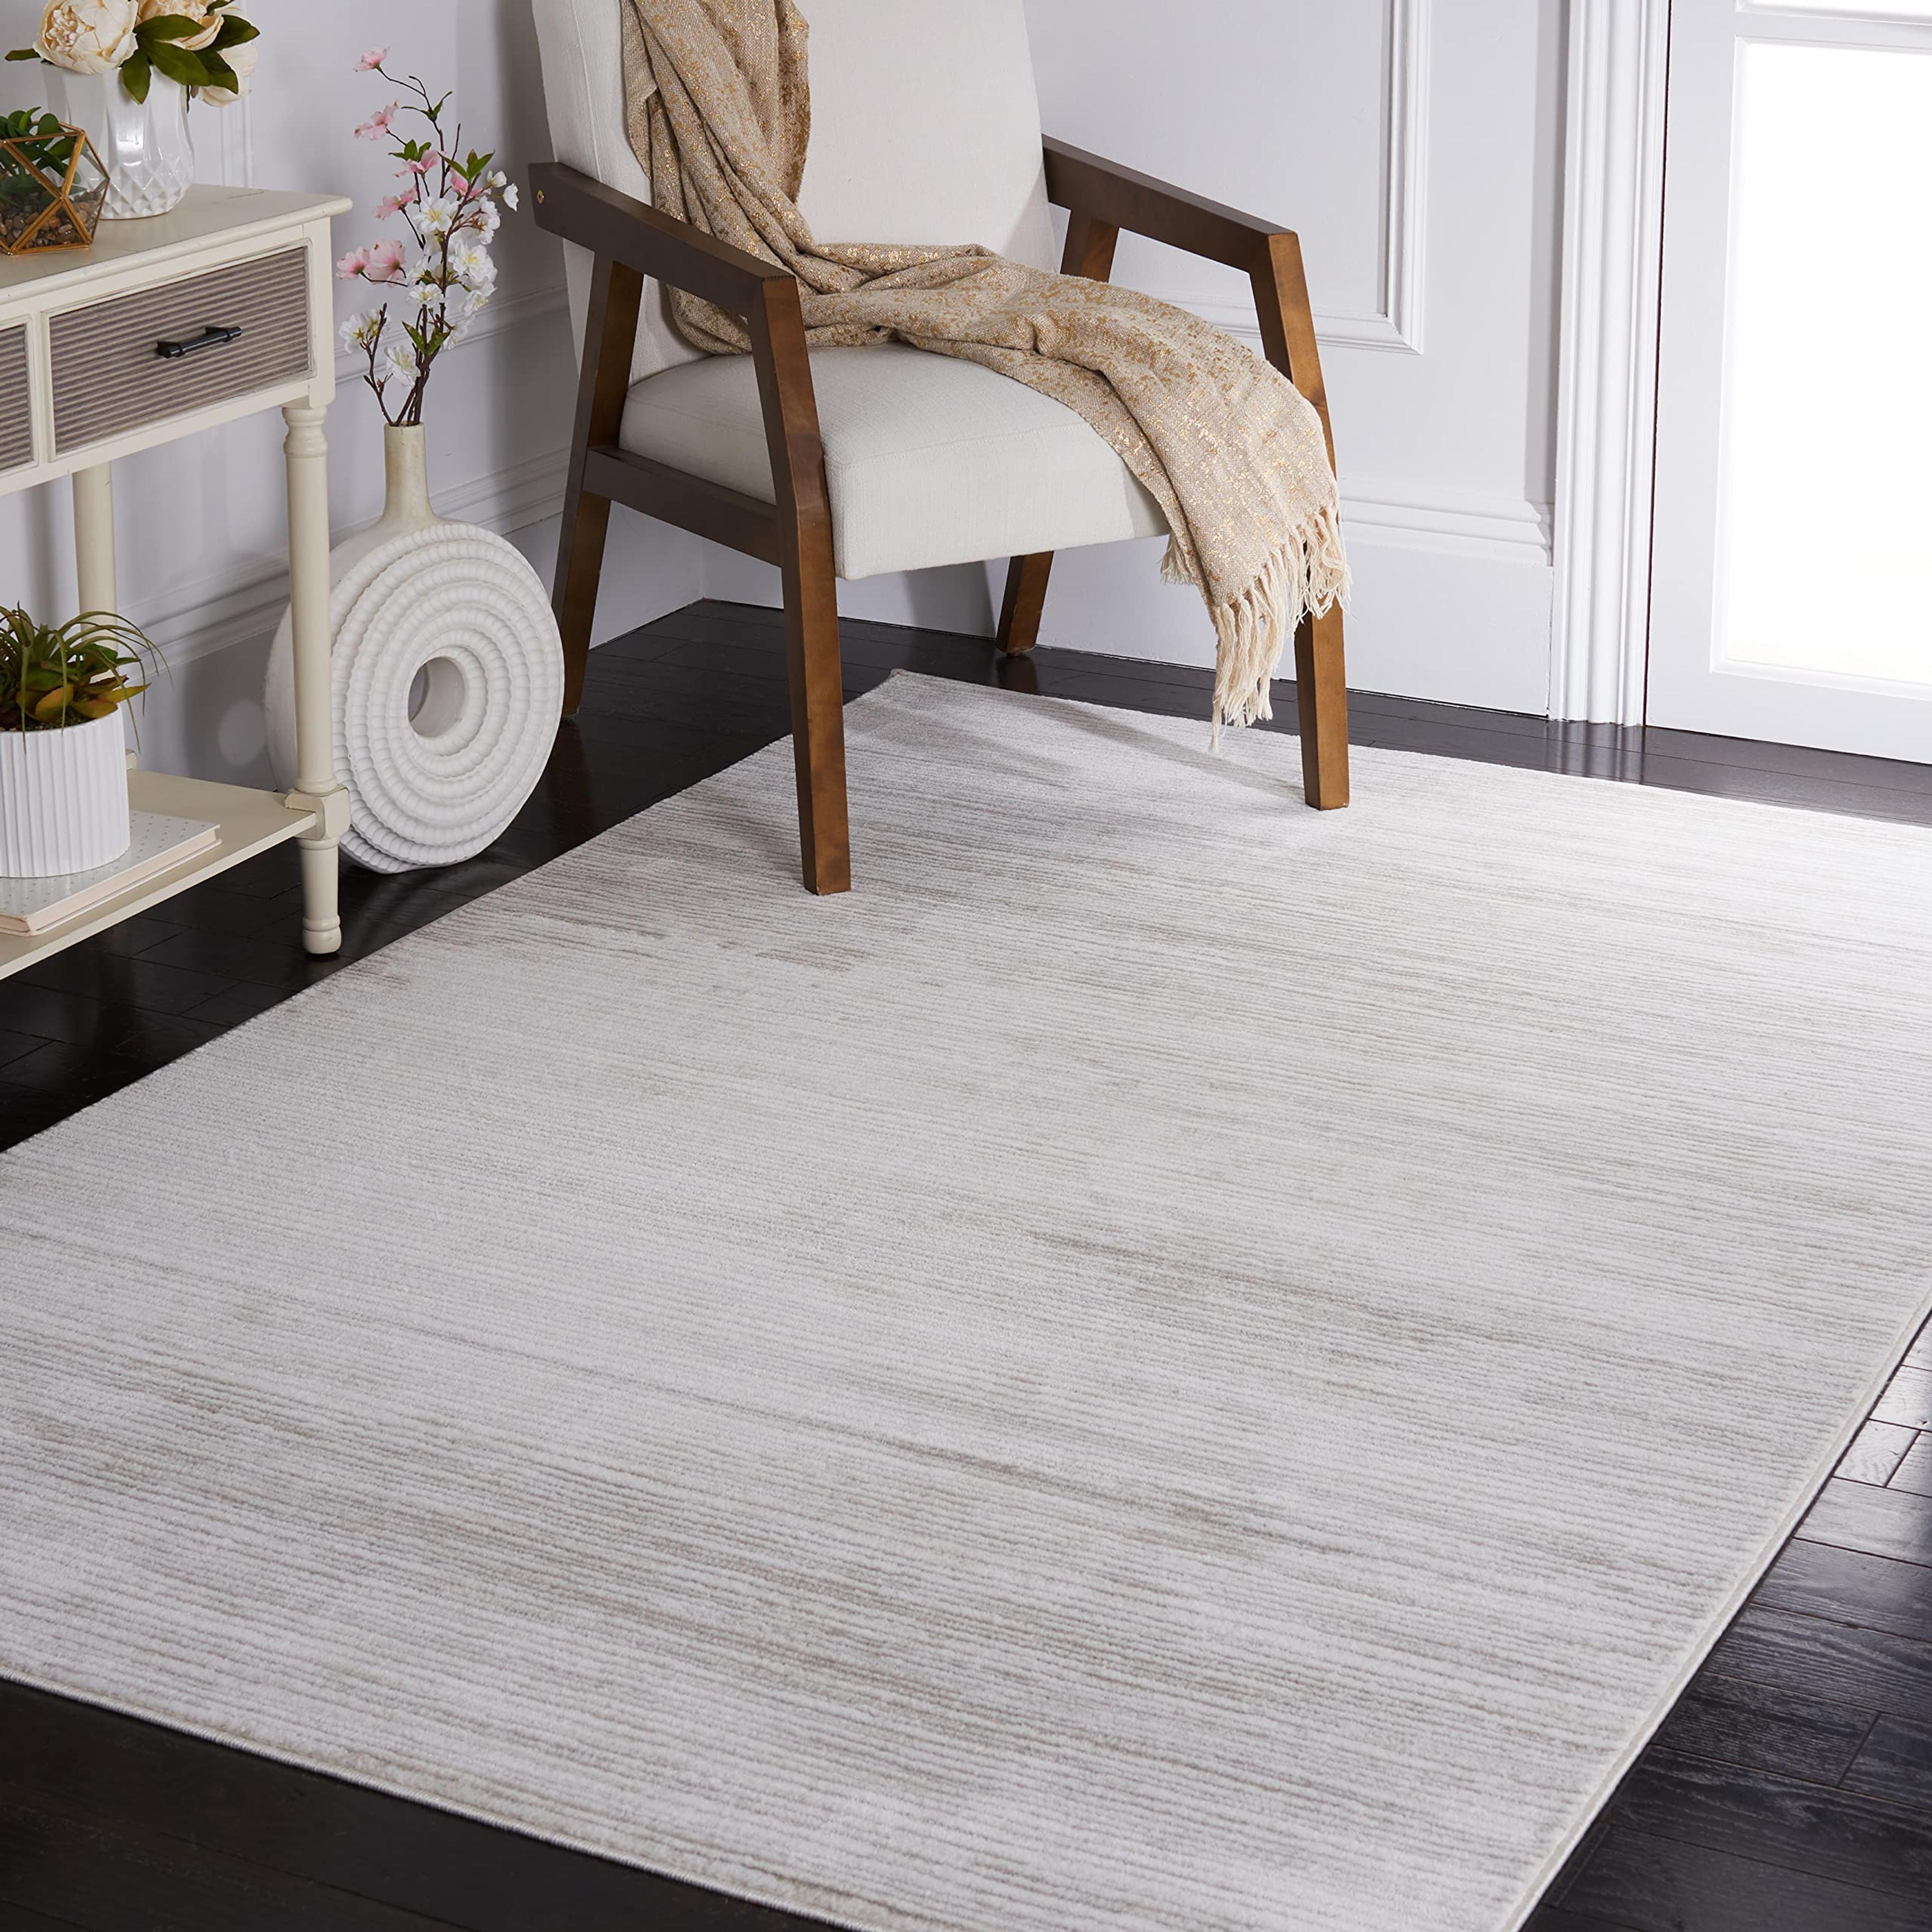 Amazon.com: SAFAVIEH Vision Collection 5 feet 1 inch x 7 feet 6 inch Ivory Grey / - VSN606K Modern Ombre Tonal Chic Non-Shedding Living Room Dining Bedroom Area Rug : Home & Kitchen